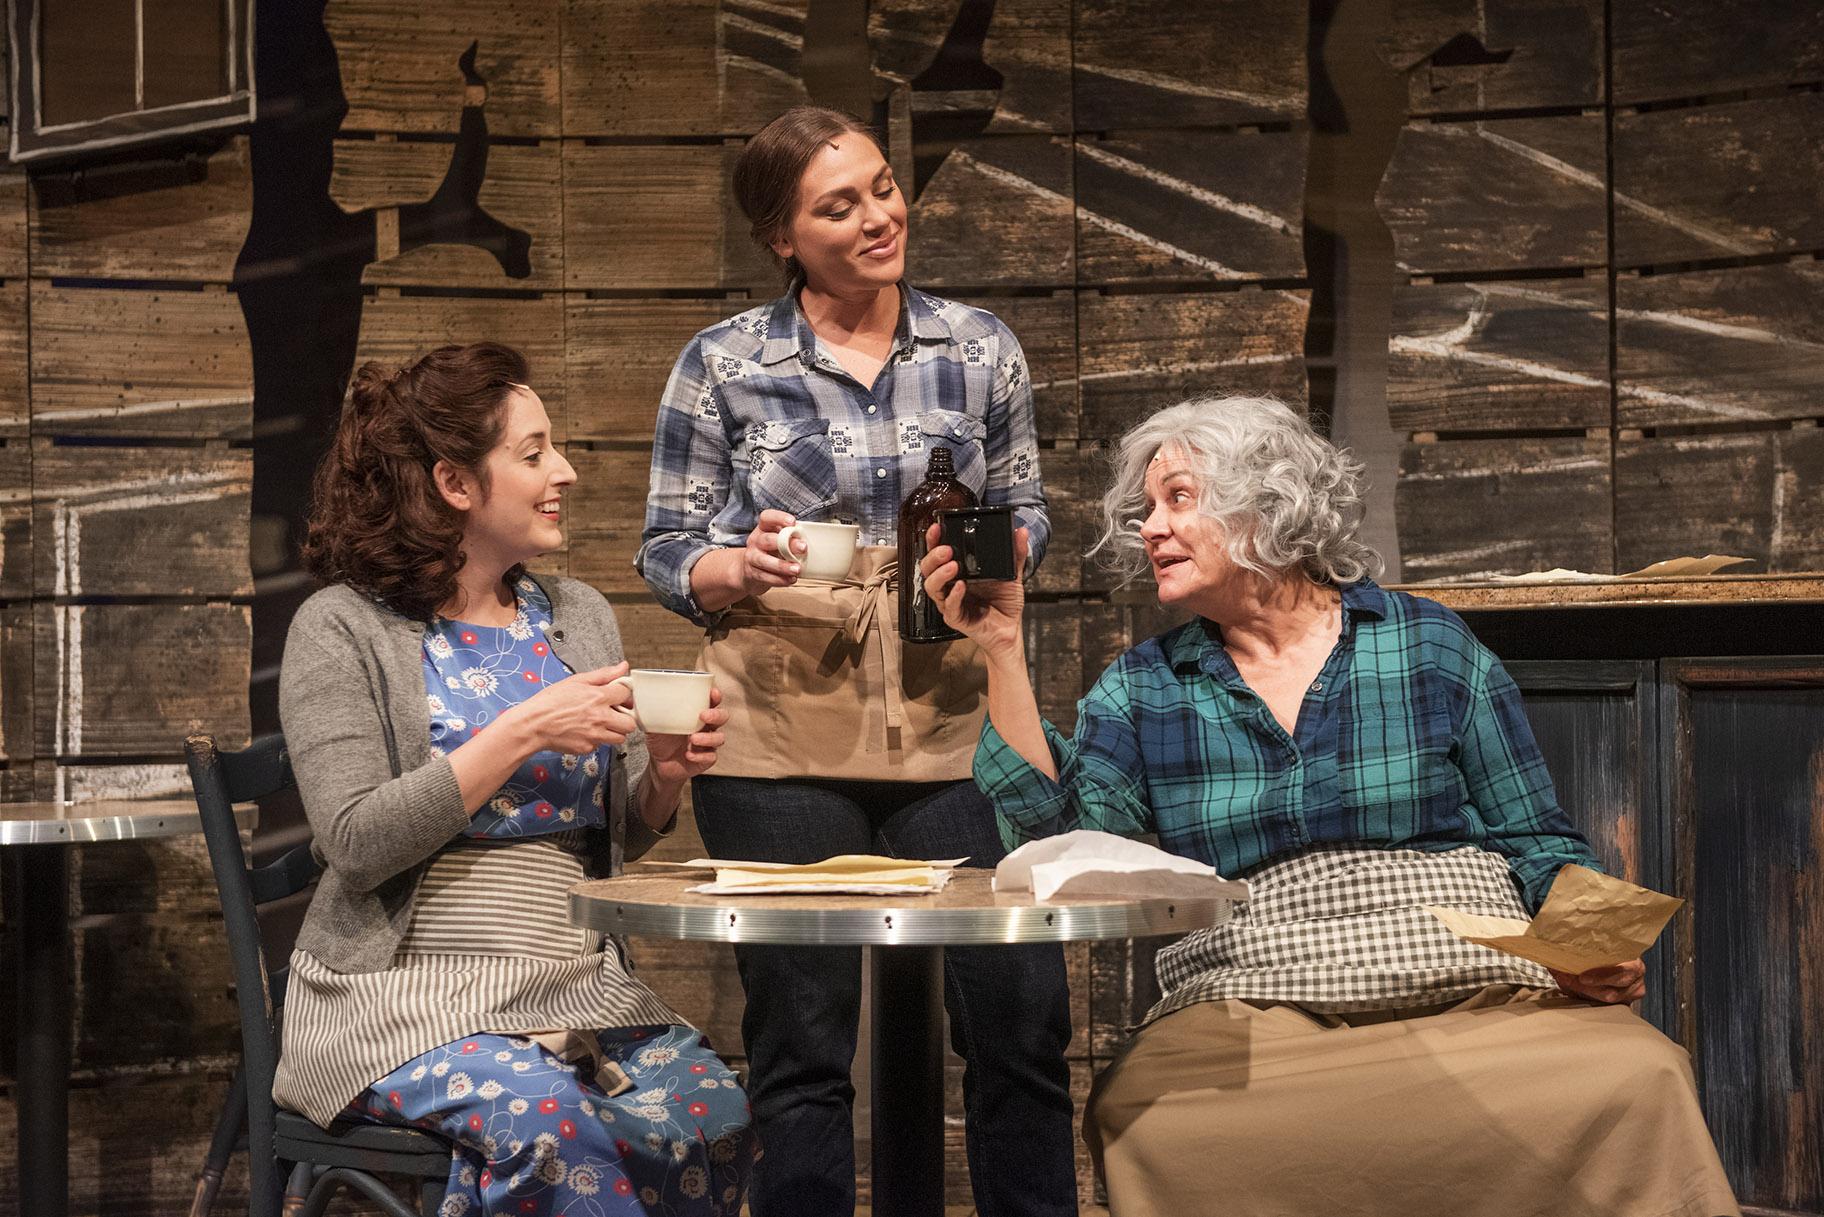 From left: Dara Cameron, Jacqulyne Jones and Catherine Smitko in “The Spitfire Grill.” (Photo by Michael Brosilow)